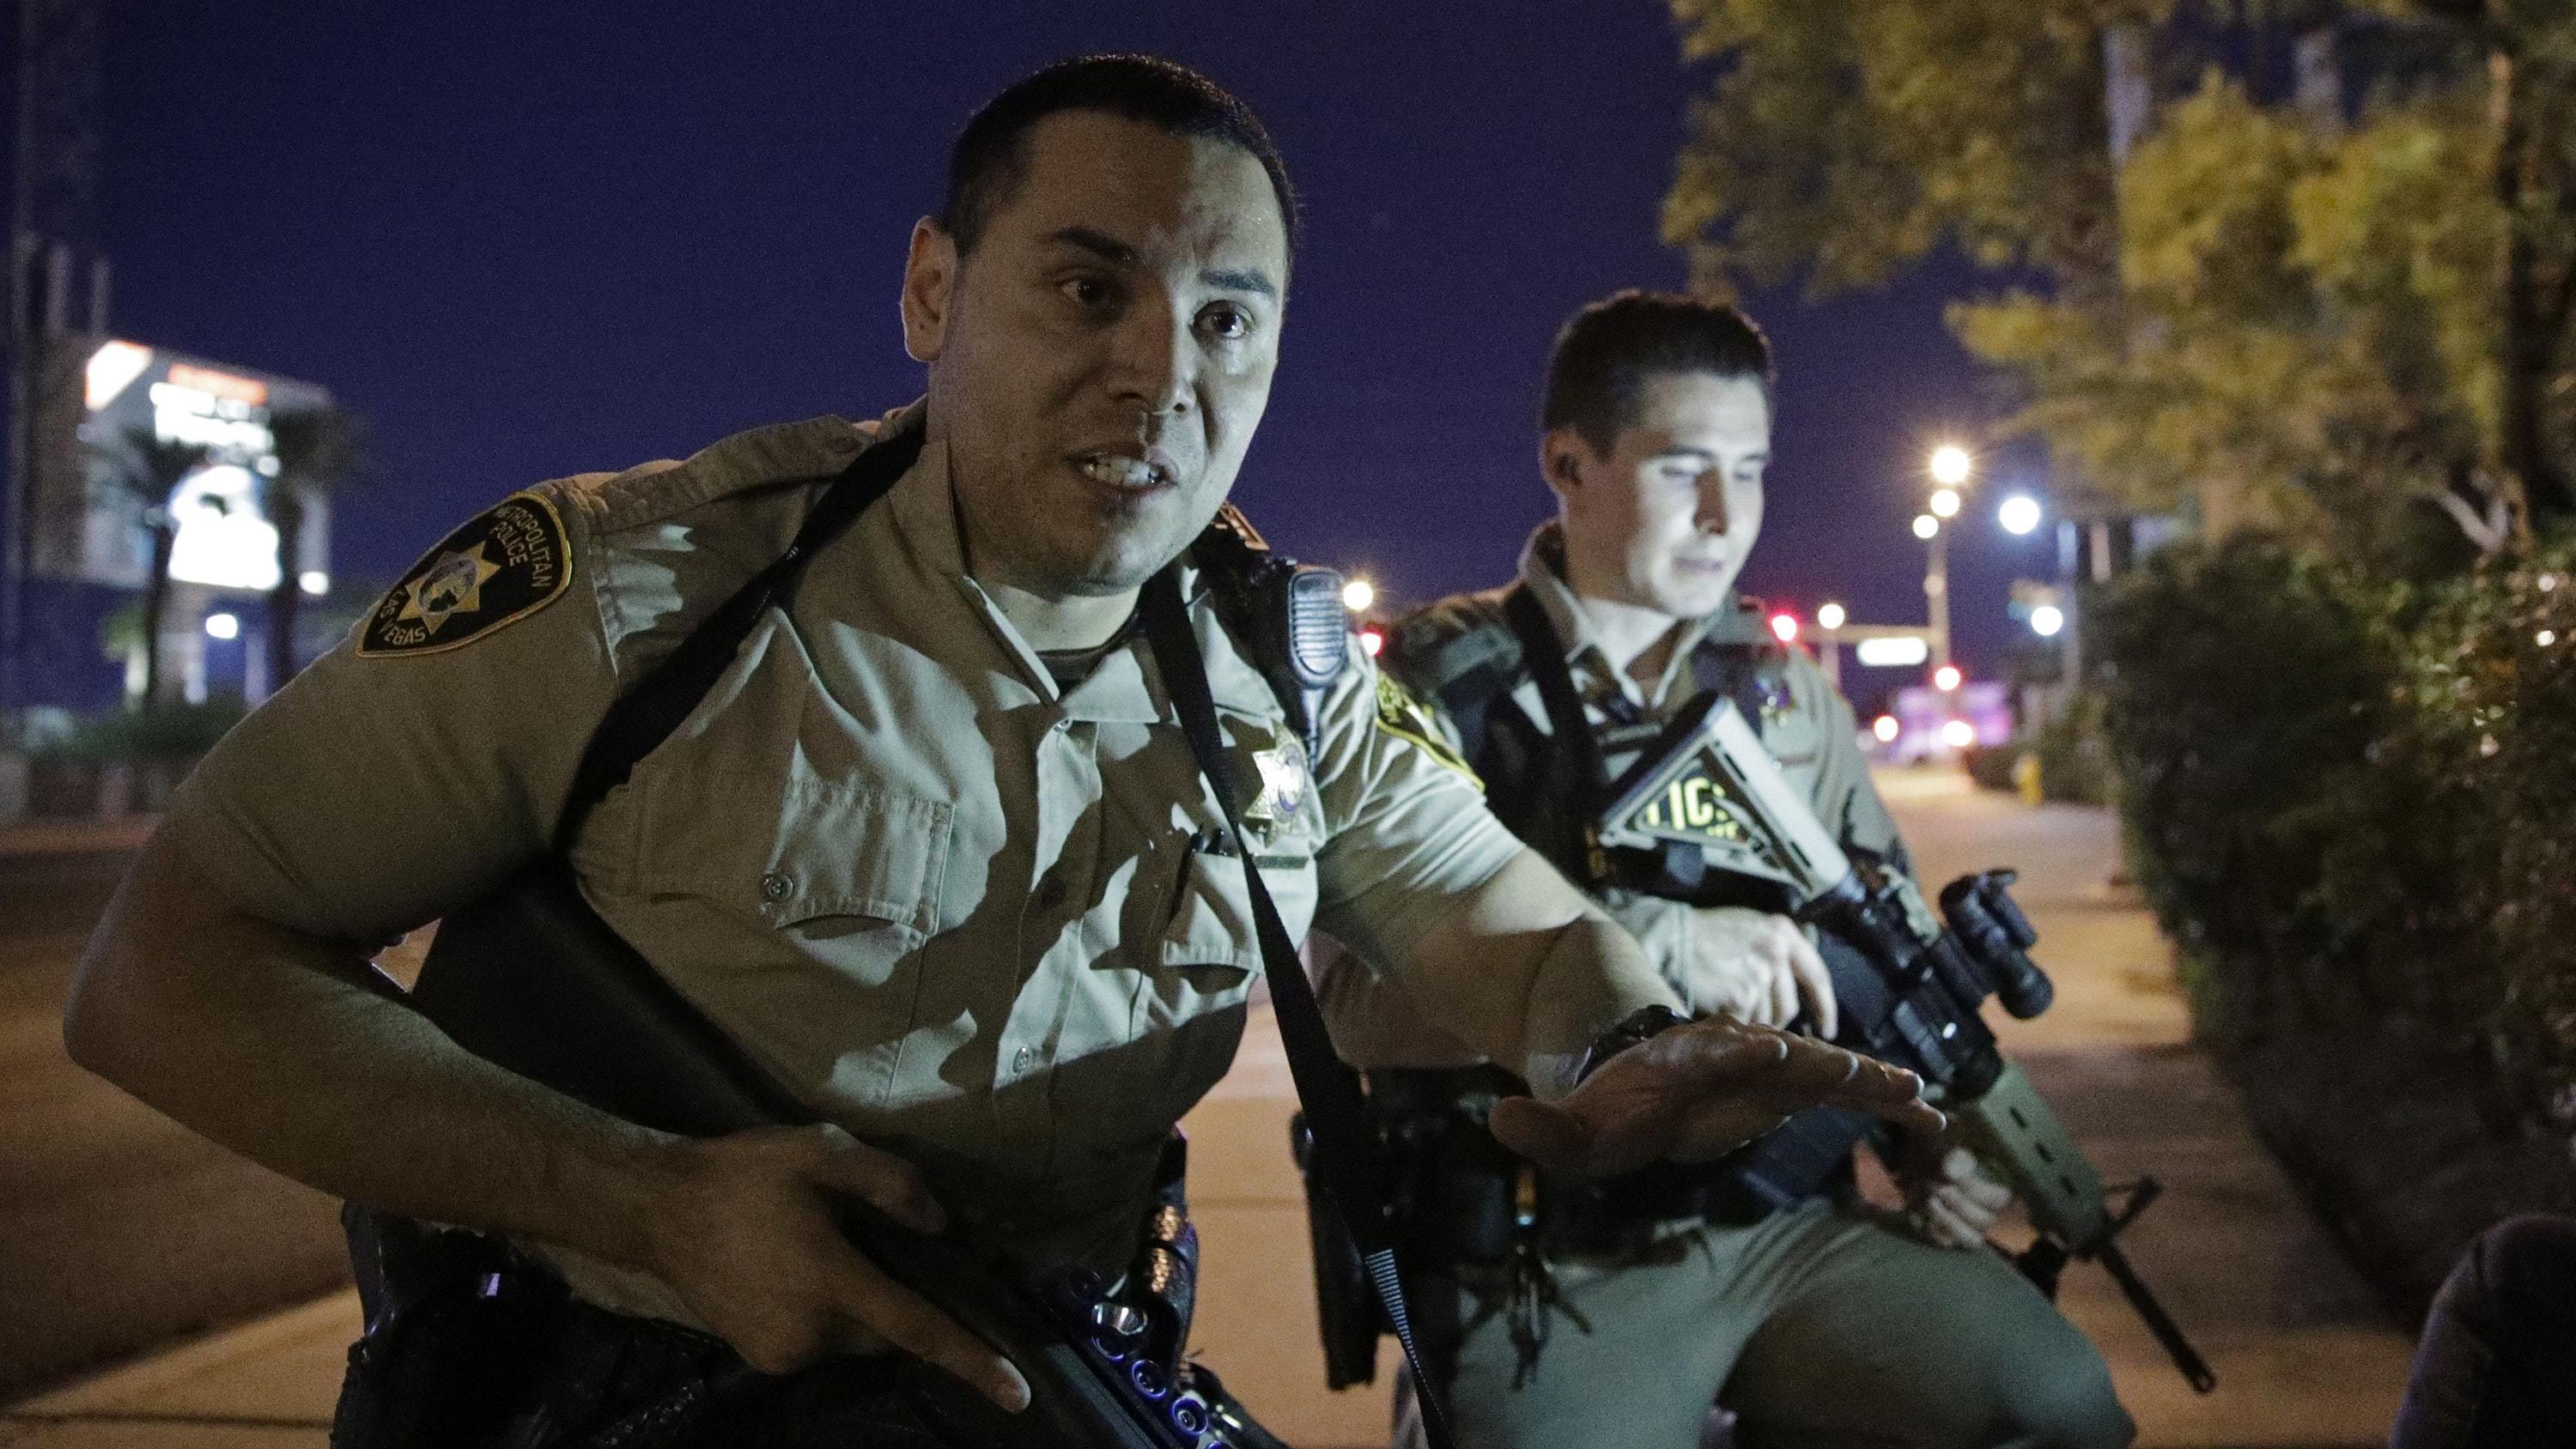 Police officers advise people to take cover near the scene of a shooting near the Mandalay Bay resort and casino on the Las Vegas Strip (John Locher/AP)